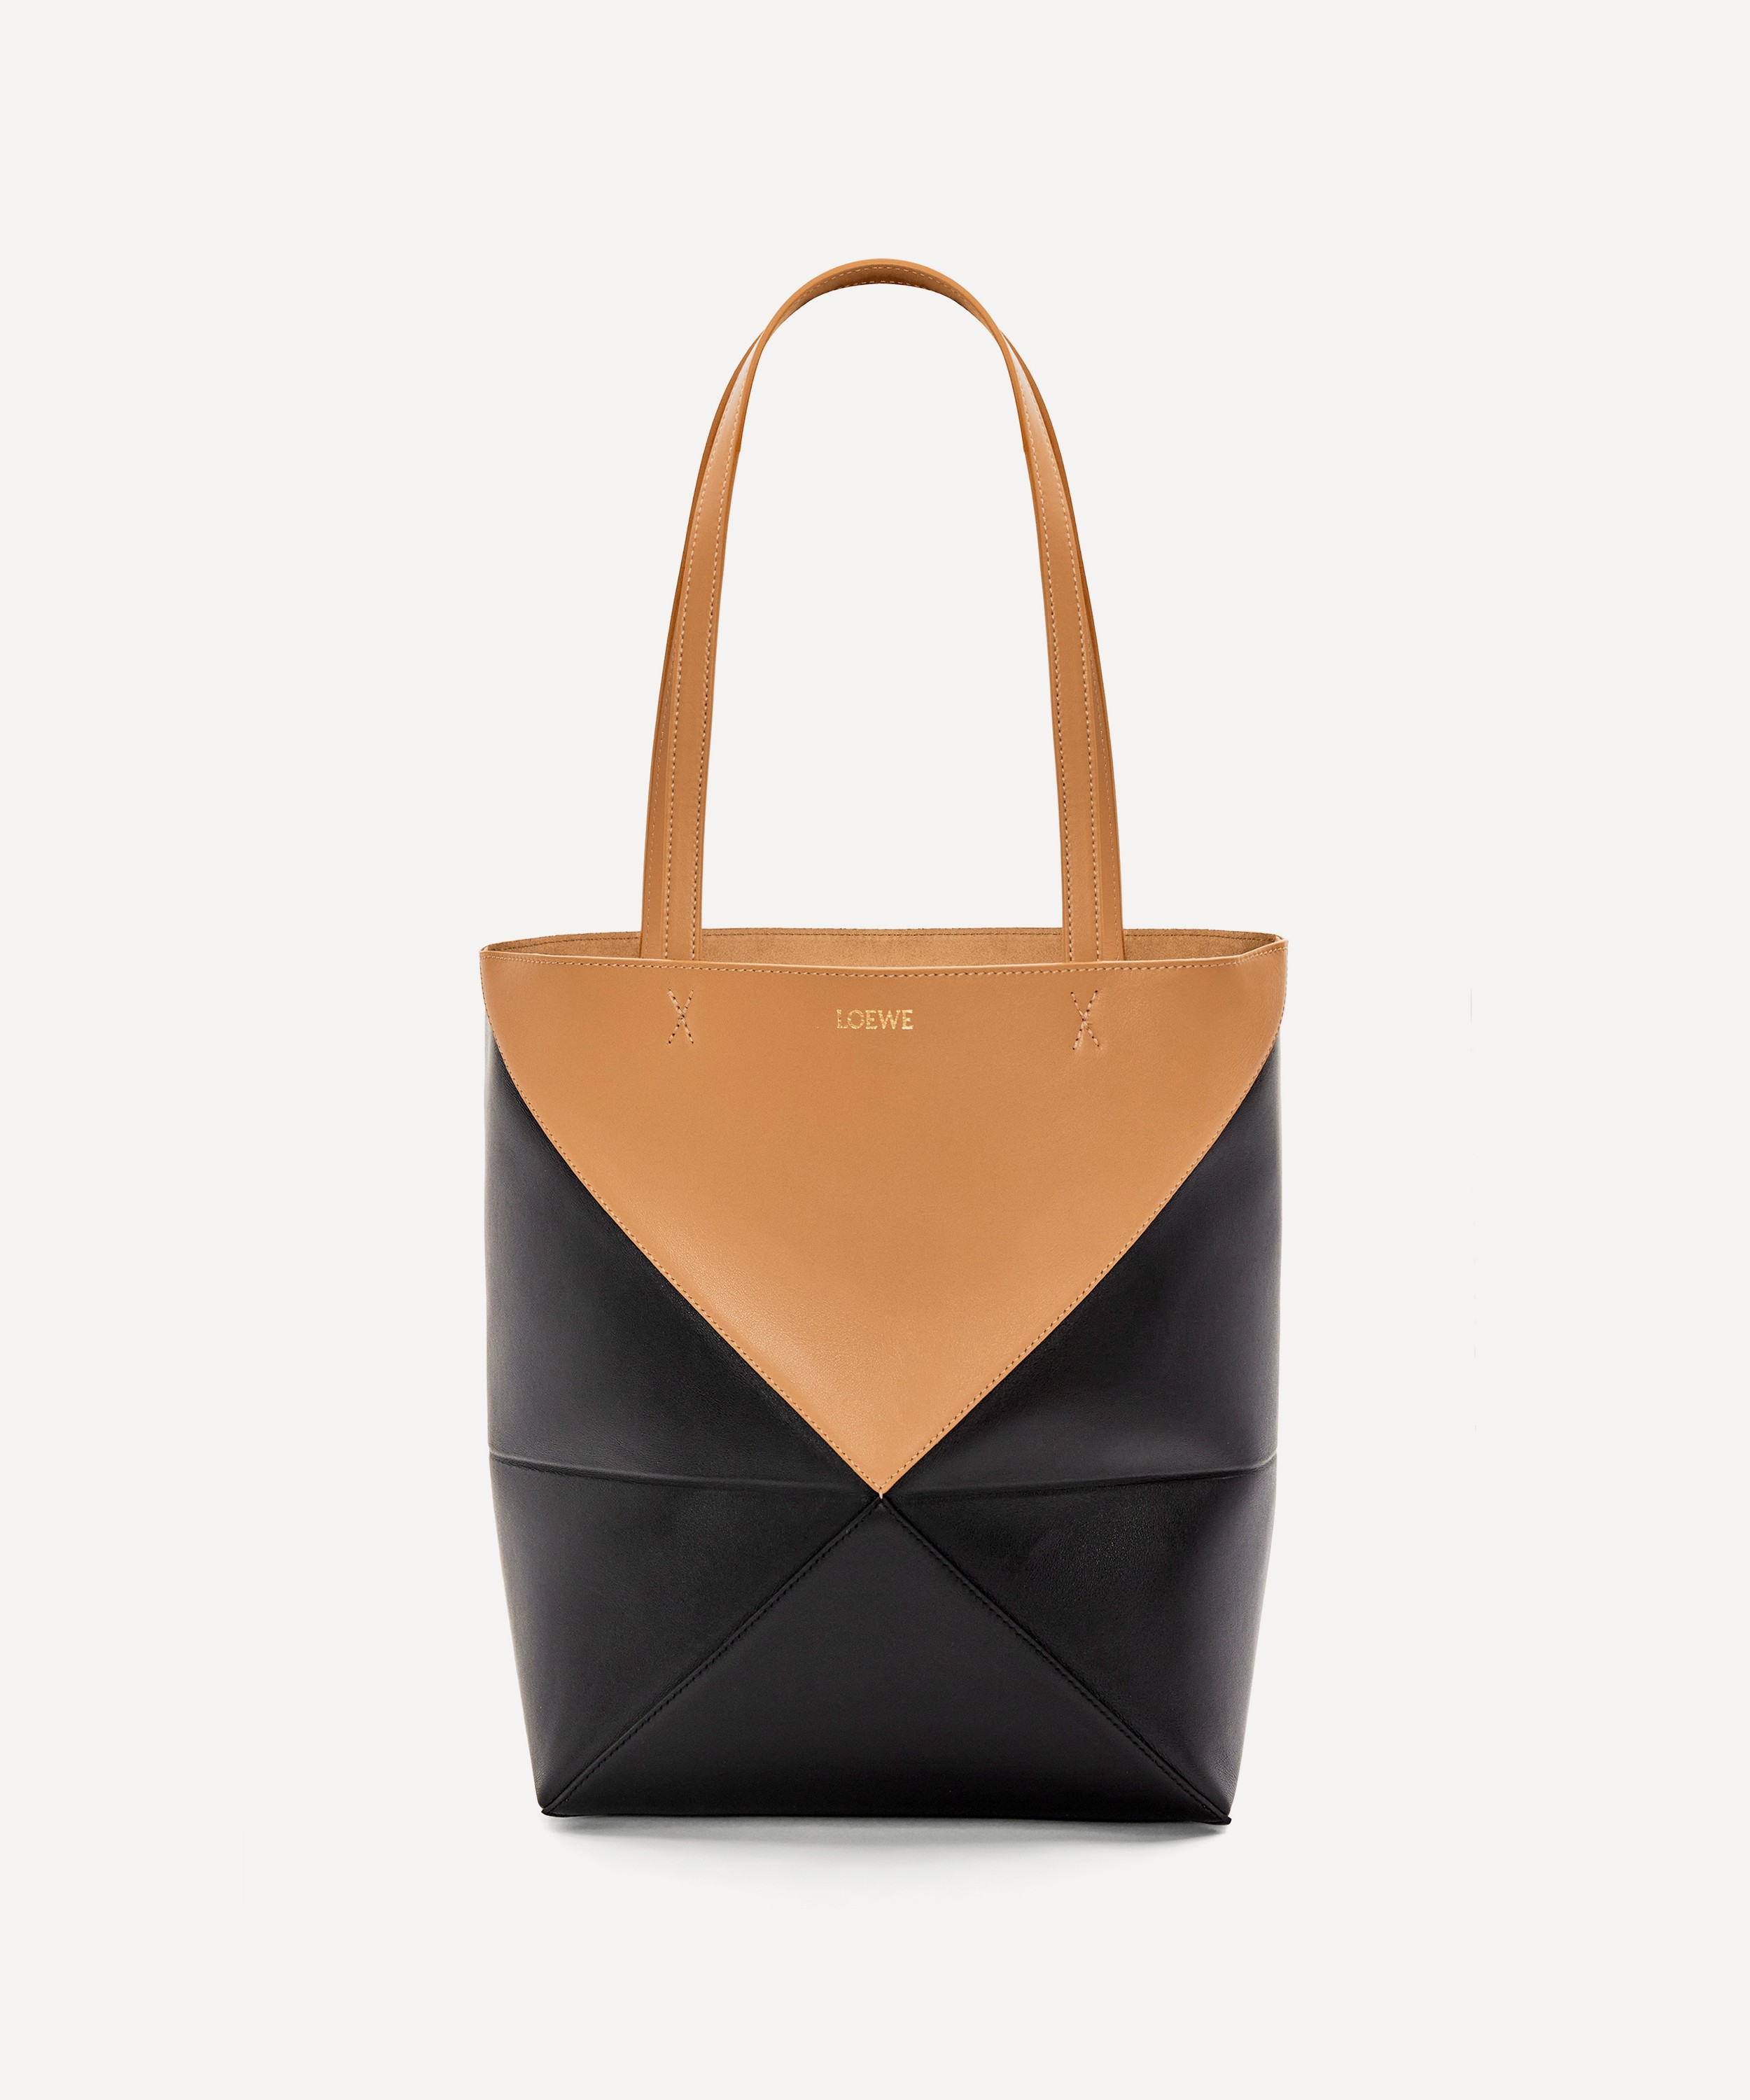 Loewe Puzzle Fold Leather Tote Bag